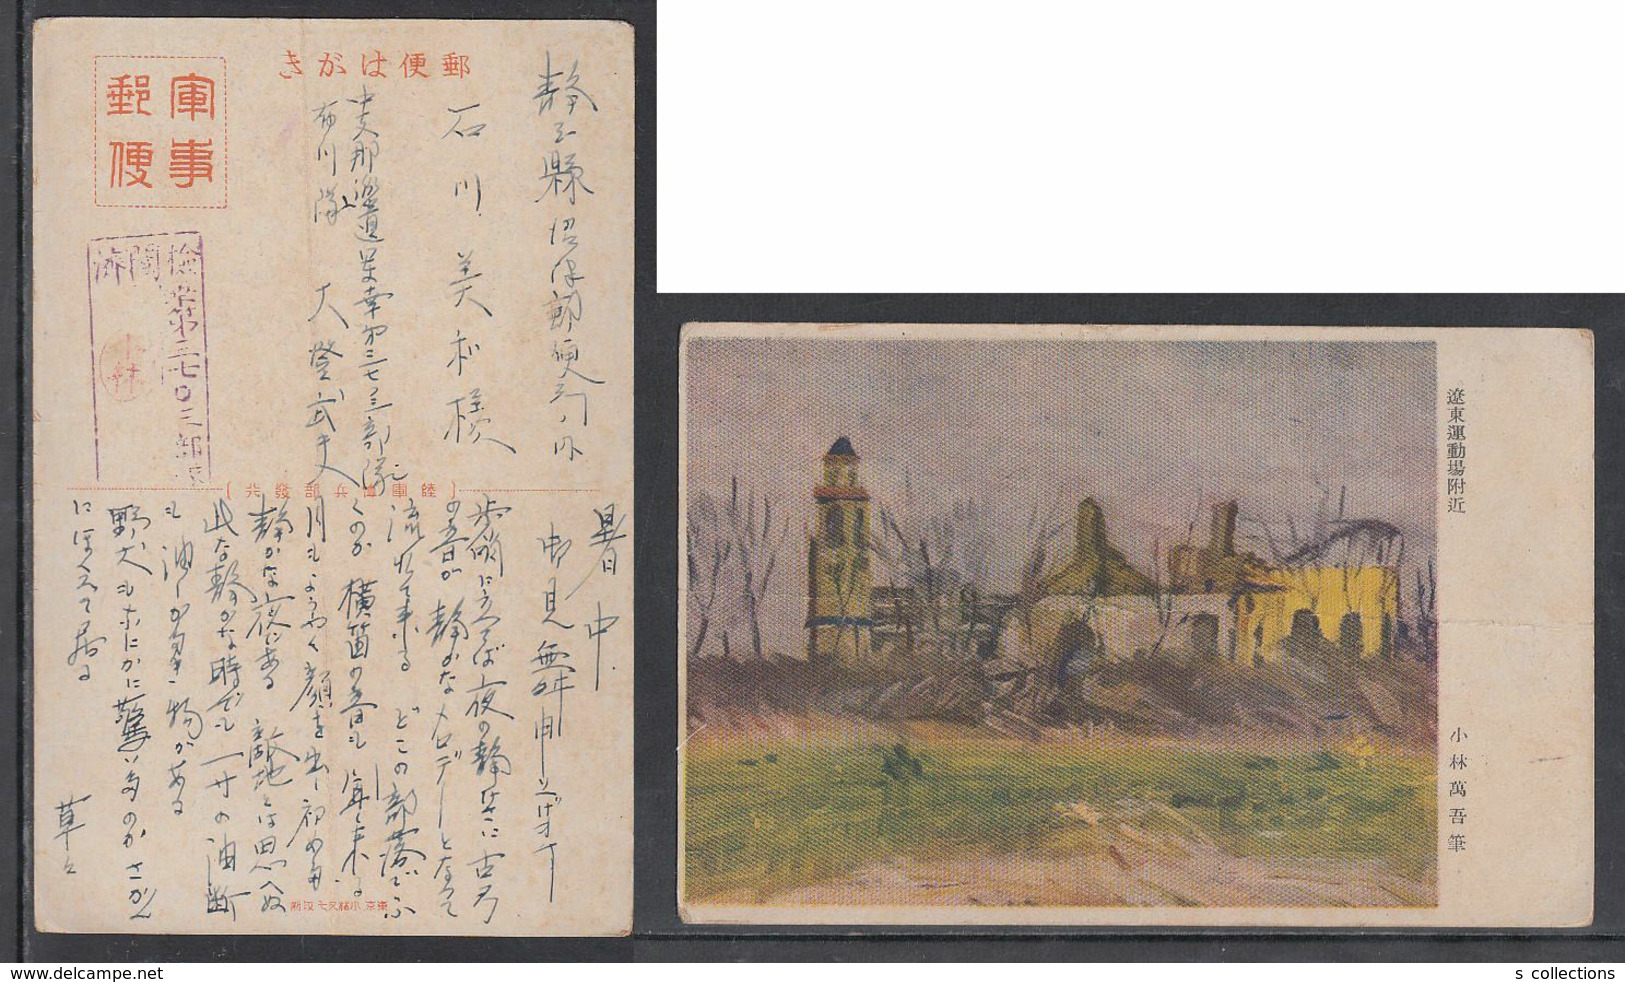 JAPAN WWII Military Liaodong Picture Postcard CENTRAL CHINA Zhenjiang WW2 MANCHURIA CHINE MANDCHOUKOUO JAPON GIAPPONE - 1943-45 Shanghai & Nanjing